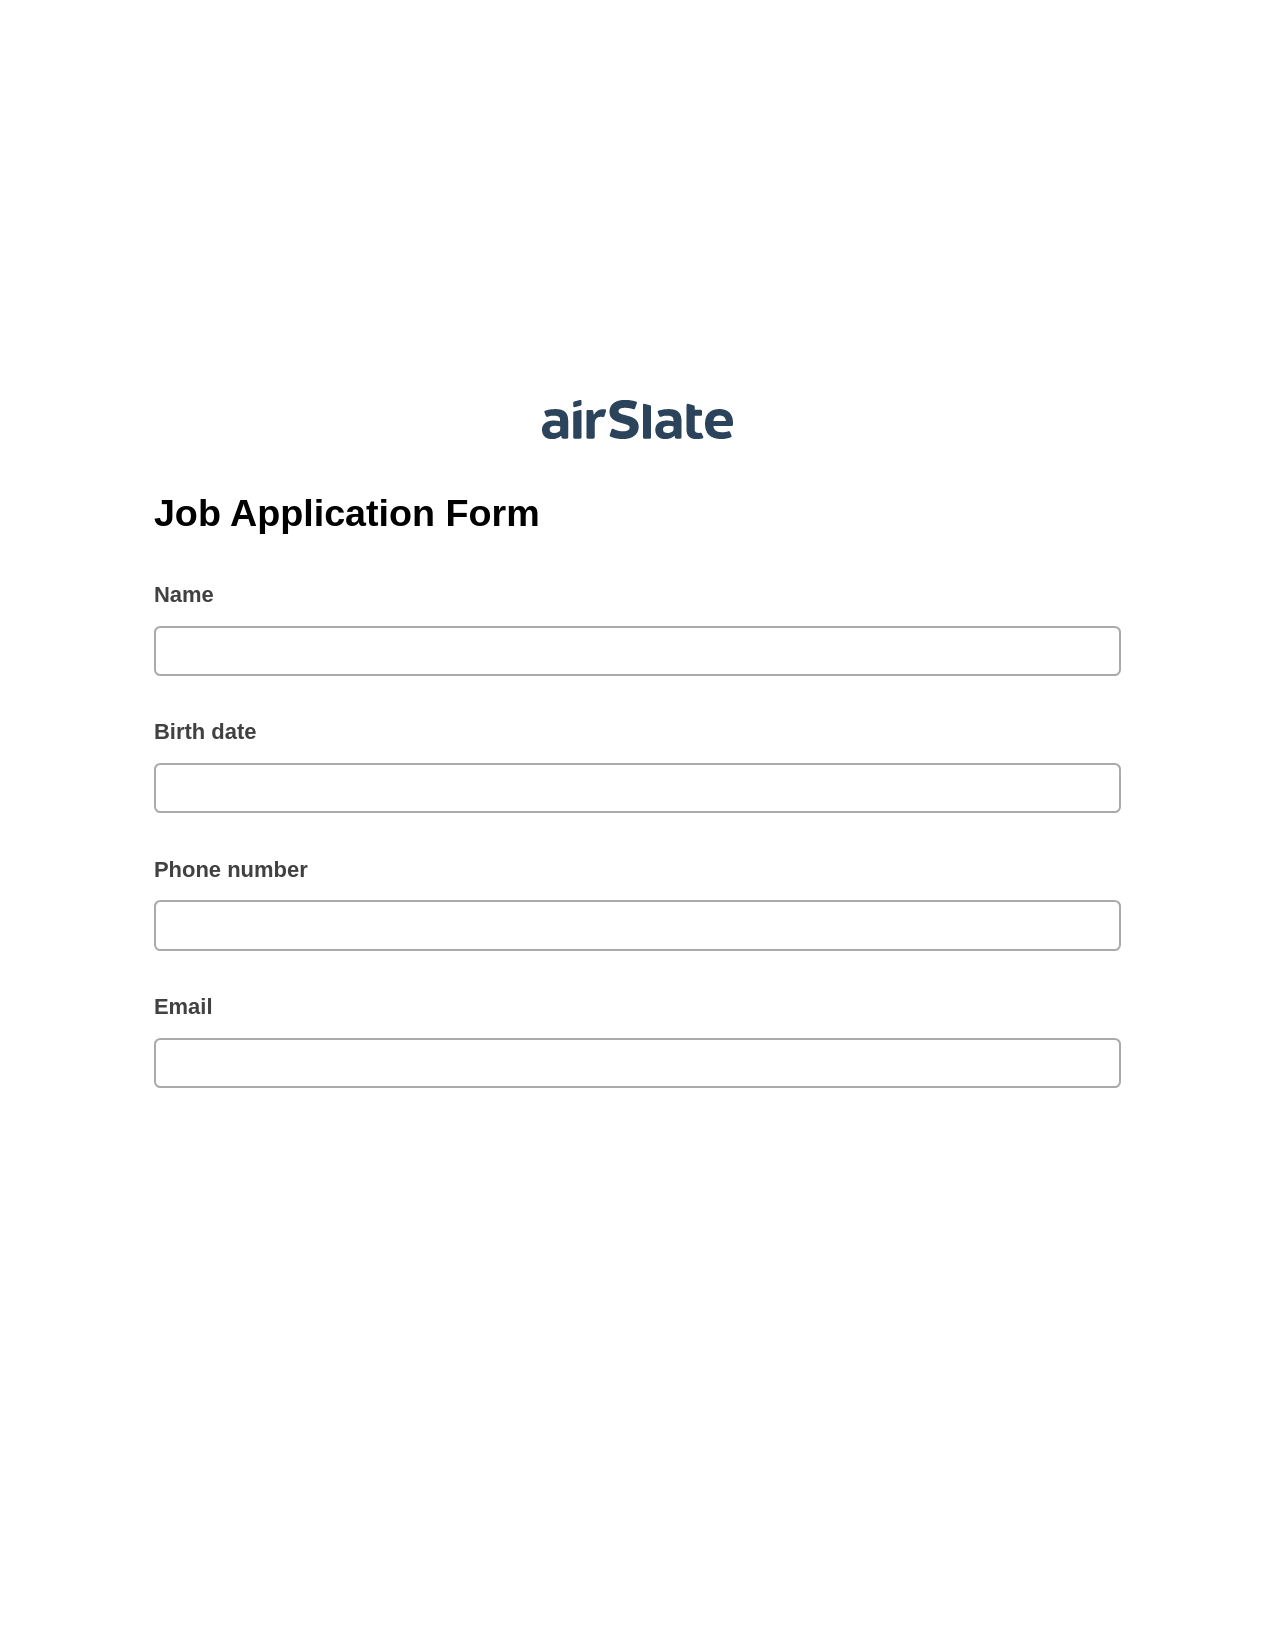 Multirole Job Application Form System Bot - Slack Two-Way Binding Bot, Email Notification Bot, Export to Formstack Documents Bot